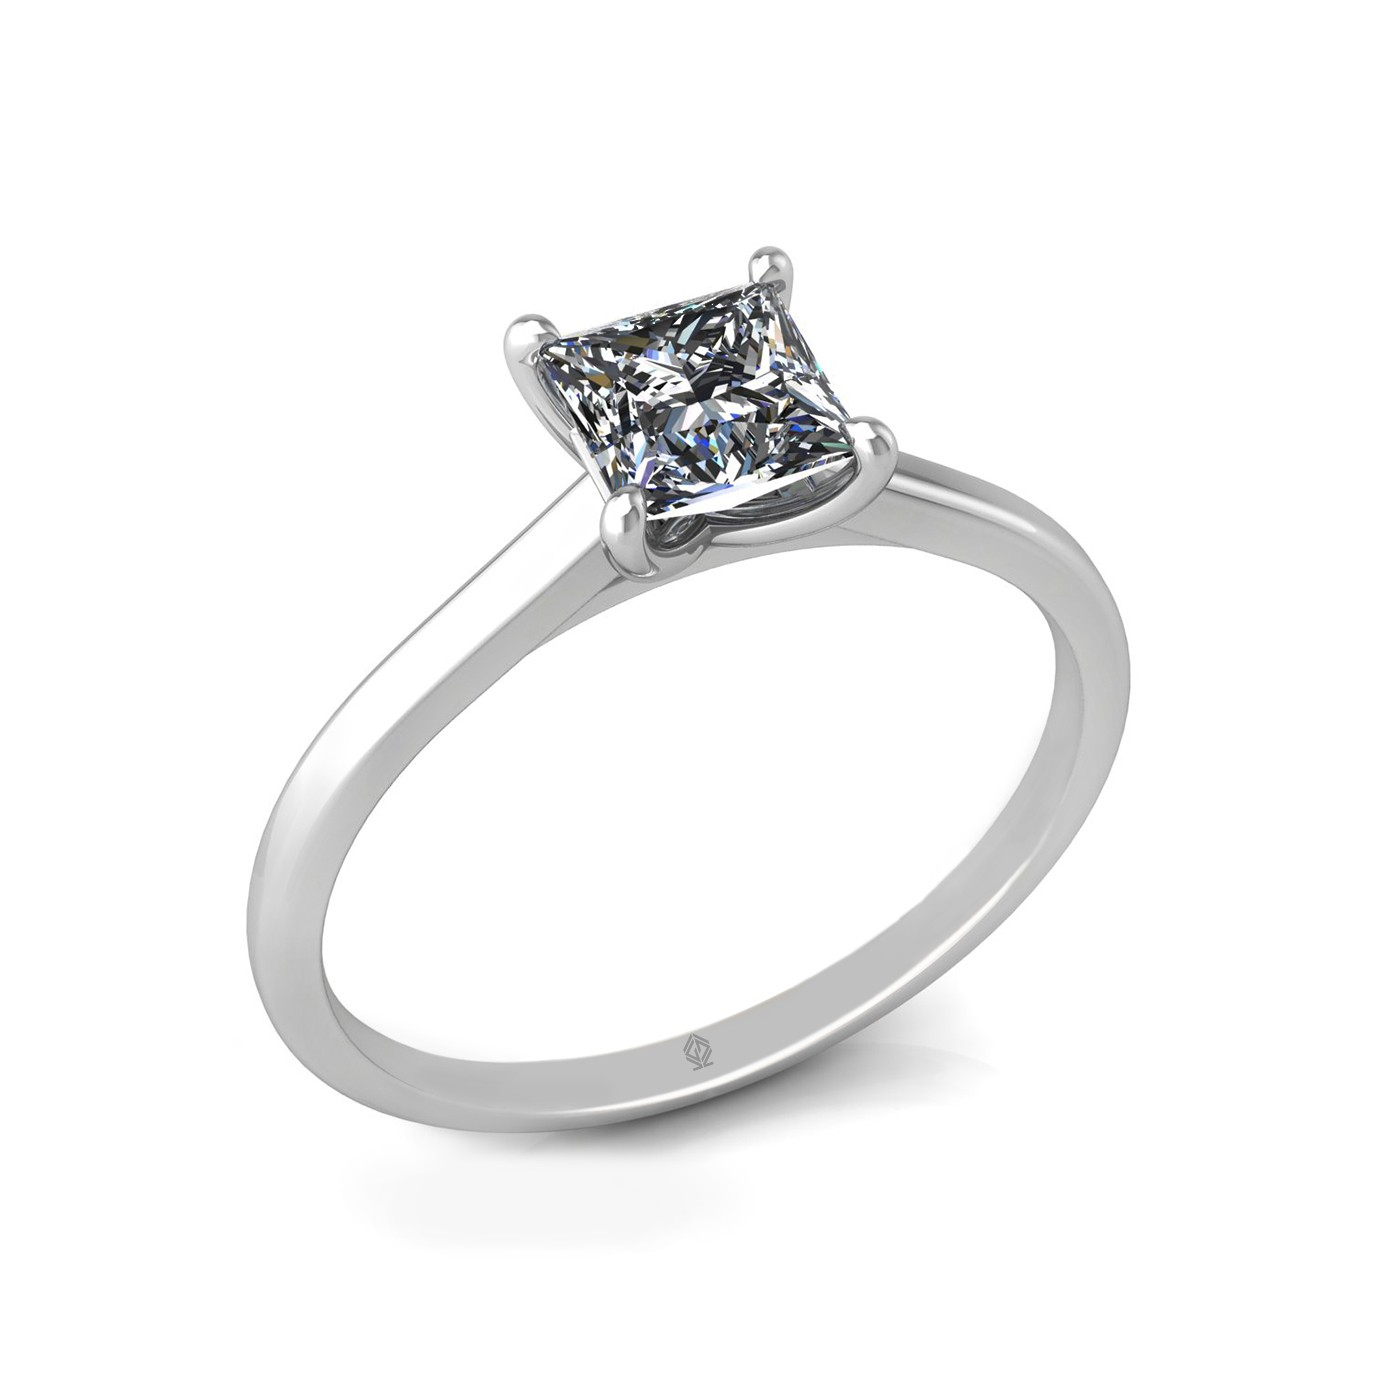 18k white gold  0,80 ct 4 prongs solitaire princess cut diamond engagement ring with whisper thin band